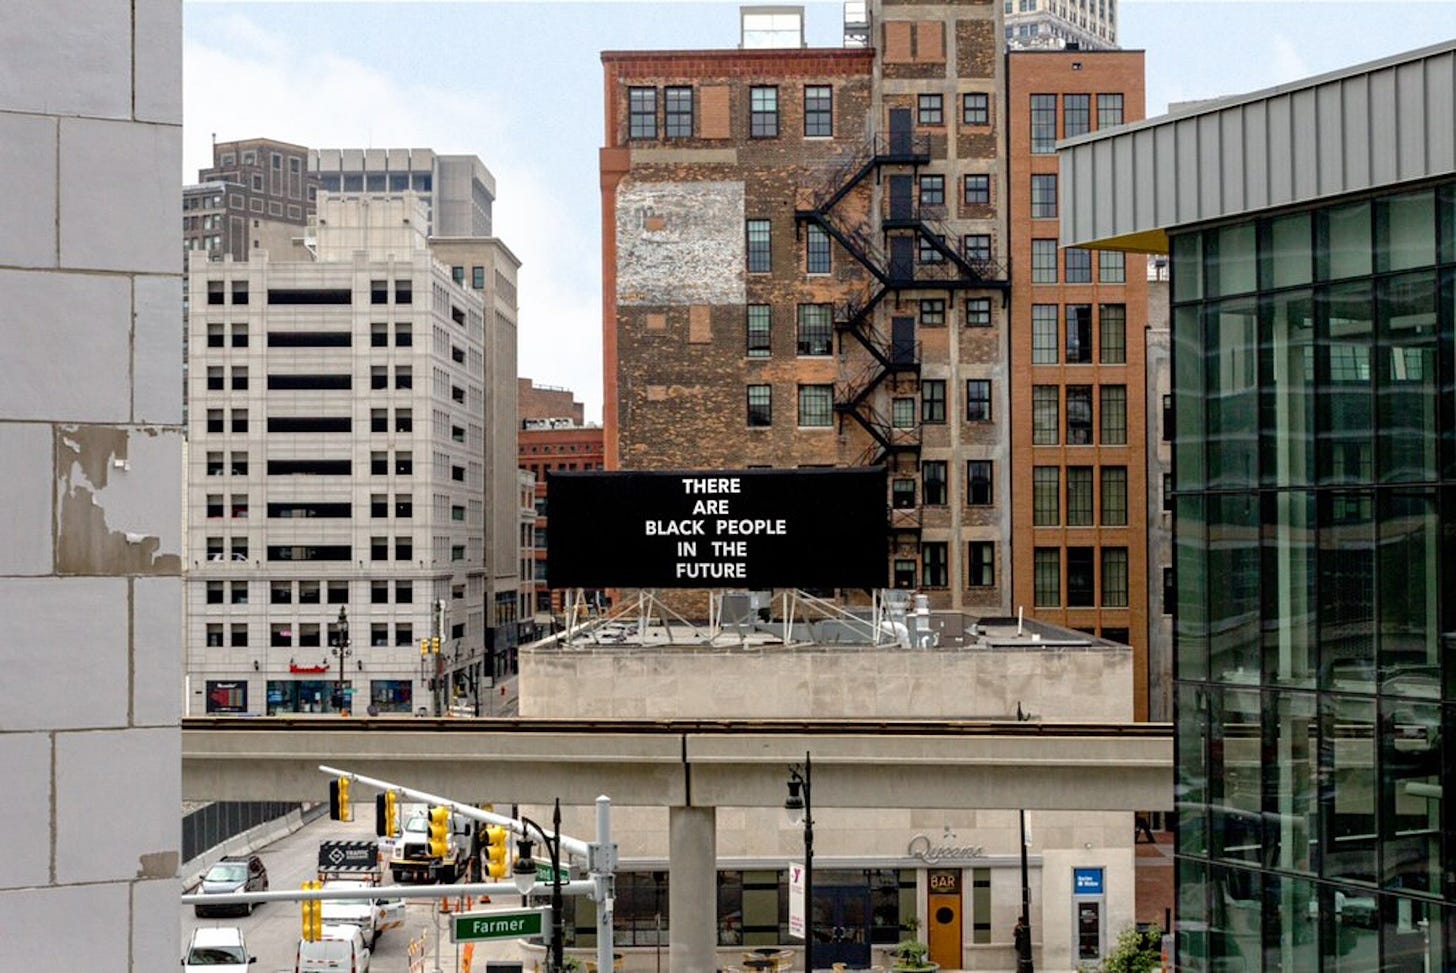 Colour photo of a solid black rectangular text artwork by Alisha B. Wormsley on the roof of a downtown building in the USA with tall buildings in the background. The billboard has white text in large capitals “THERE ARE BLACK PEOPLE IN THE FUTURE”. 